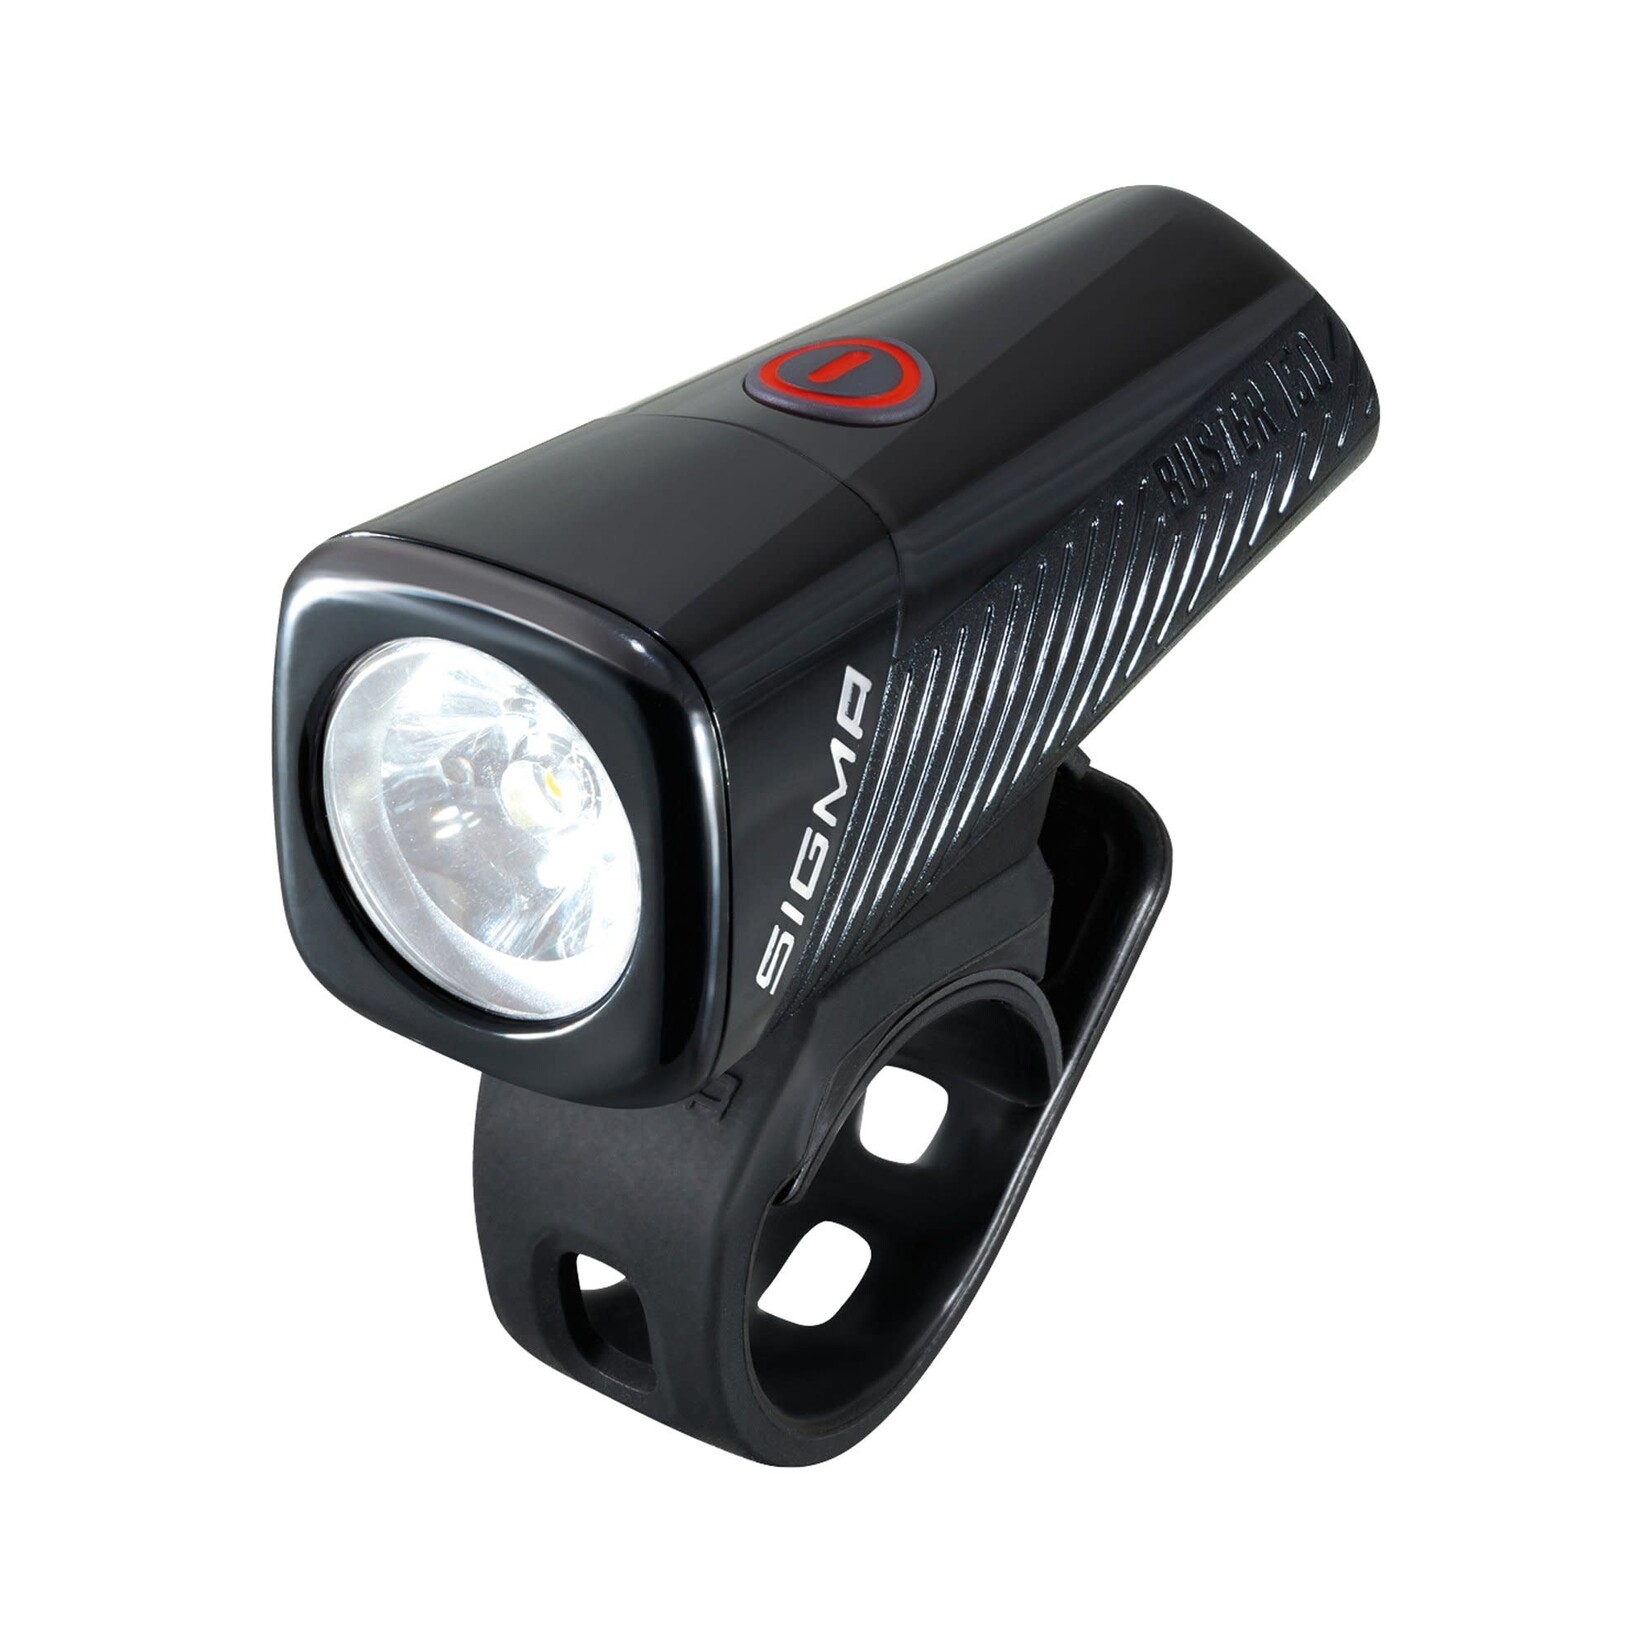 SIGMA Sigma Buster 150 Lumens Front Light